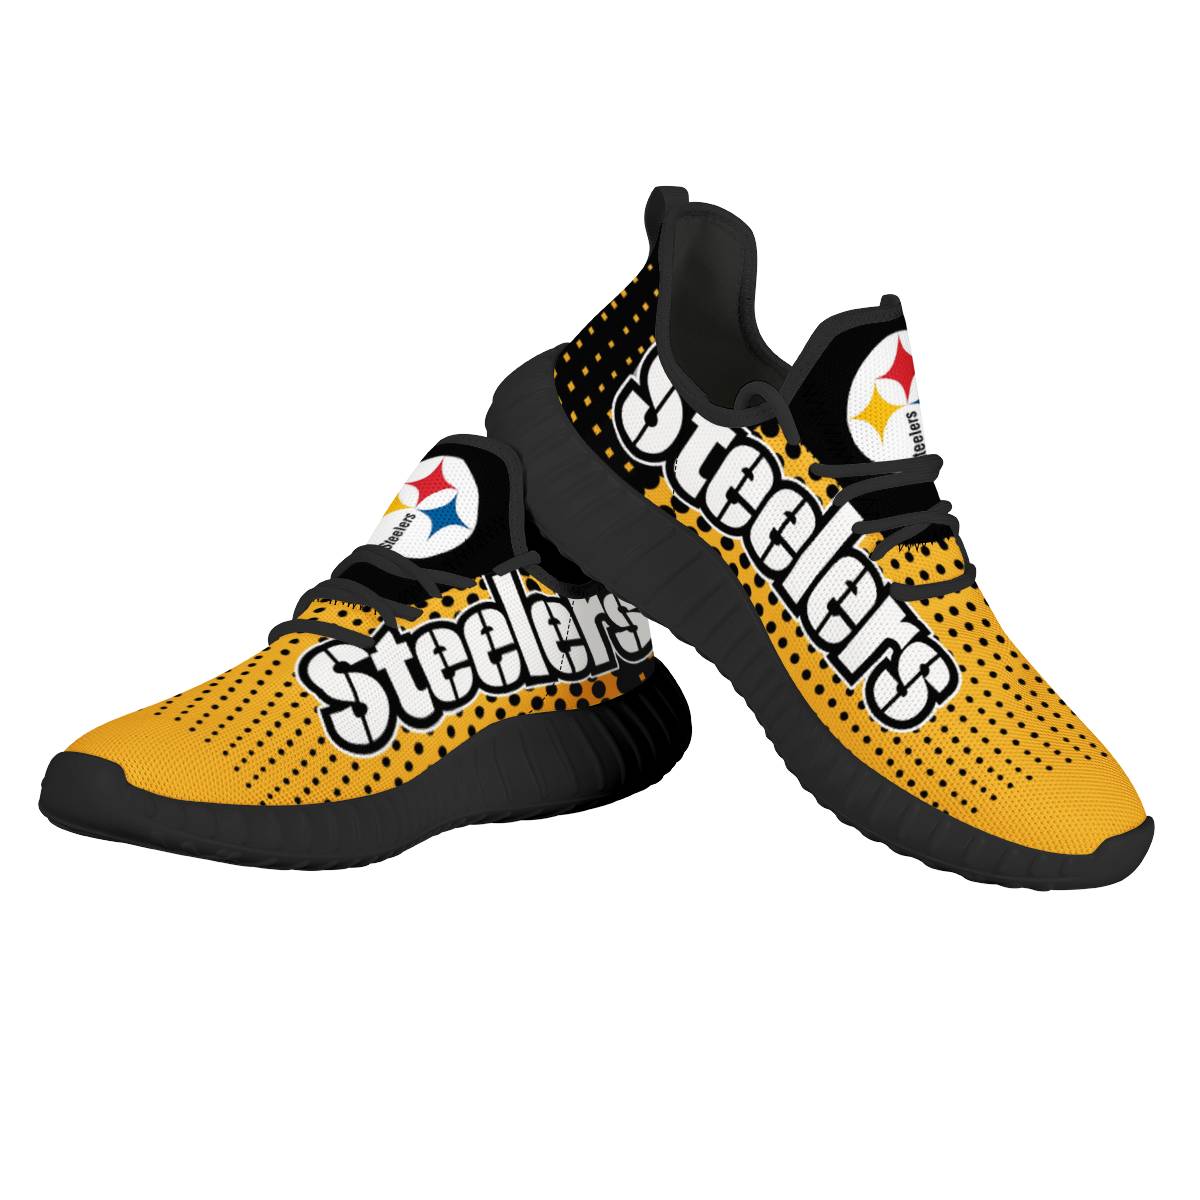 Women's NFL Pittsburgh Steelers Mesh Knit Sneakers/Shoes 001